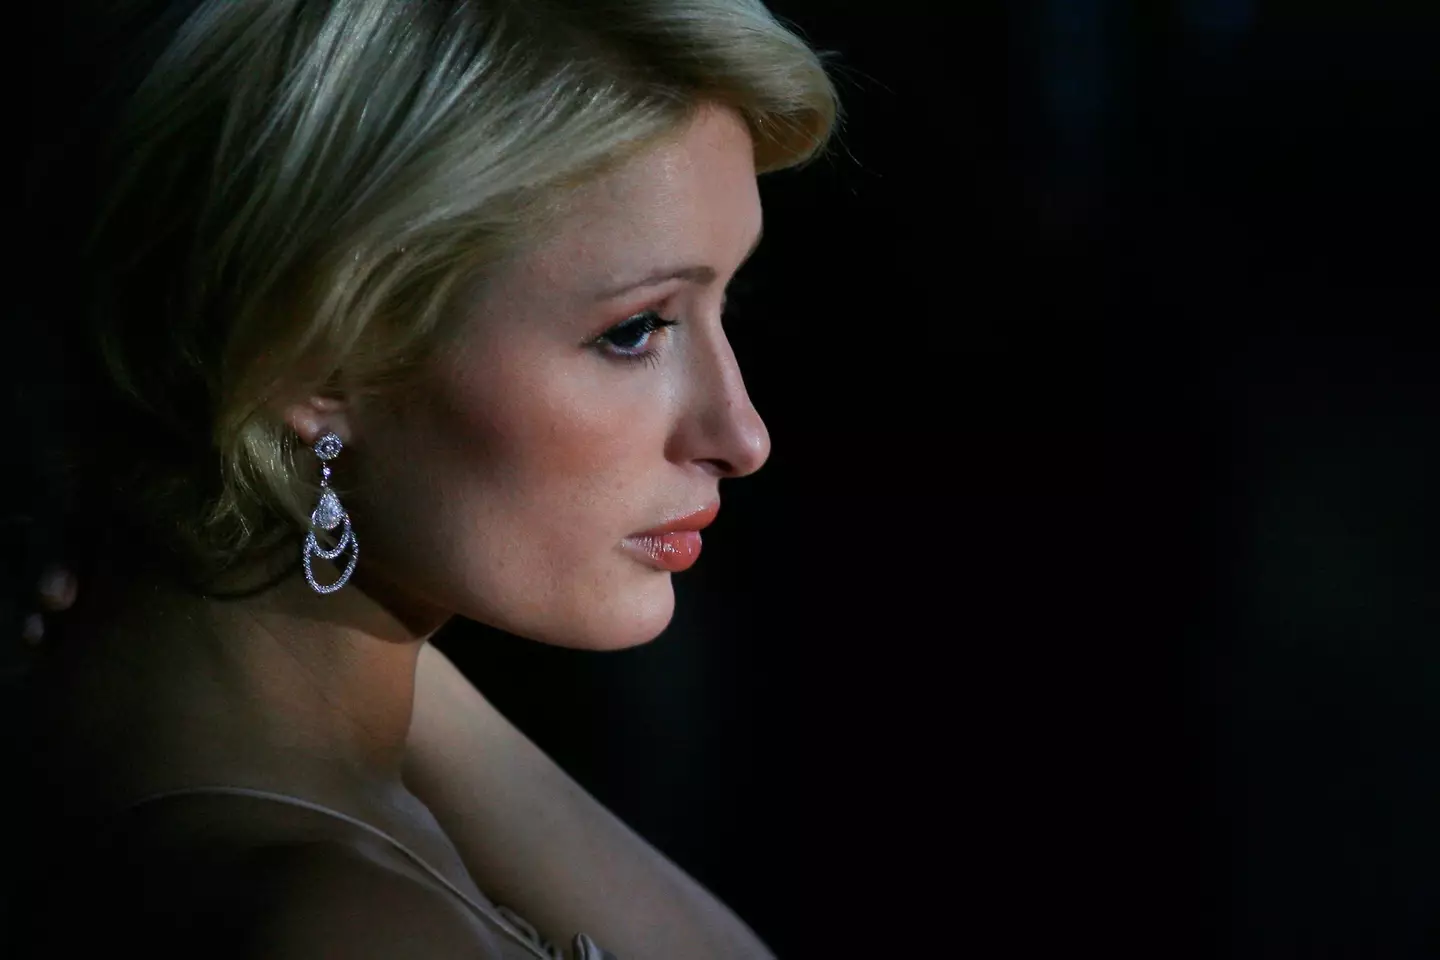 Paris Hilton has frankly discussed the sexual abuse she was allgedley subjected to at boarding school back in the 1990s.